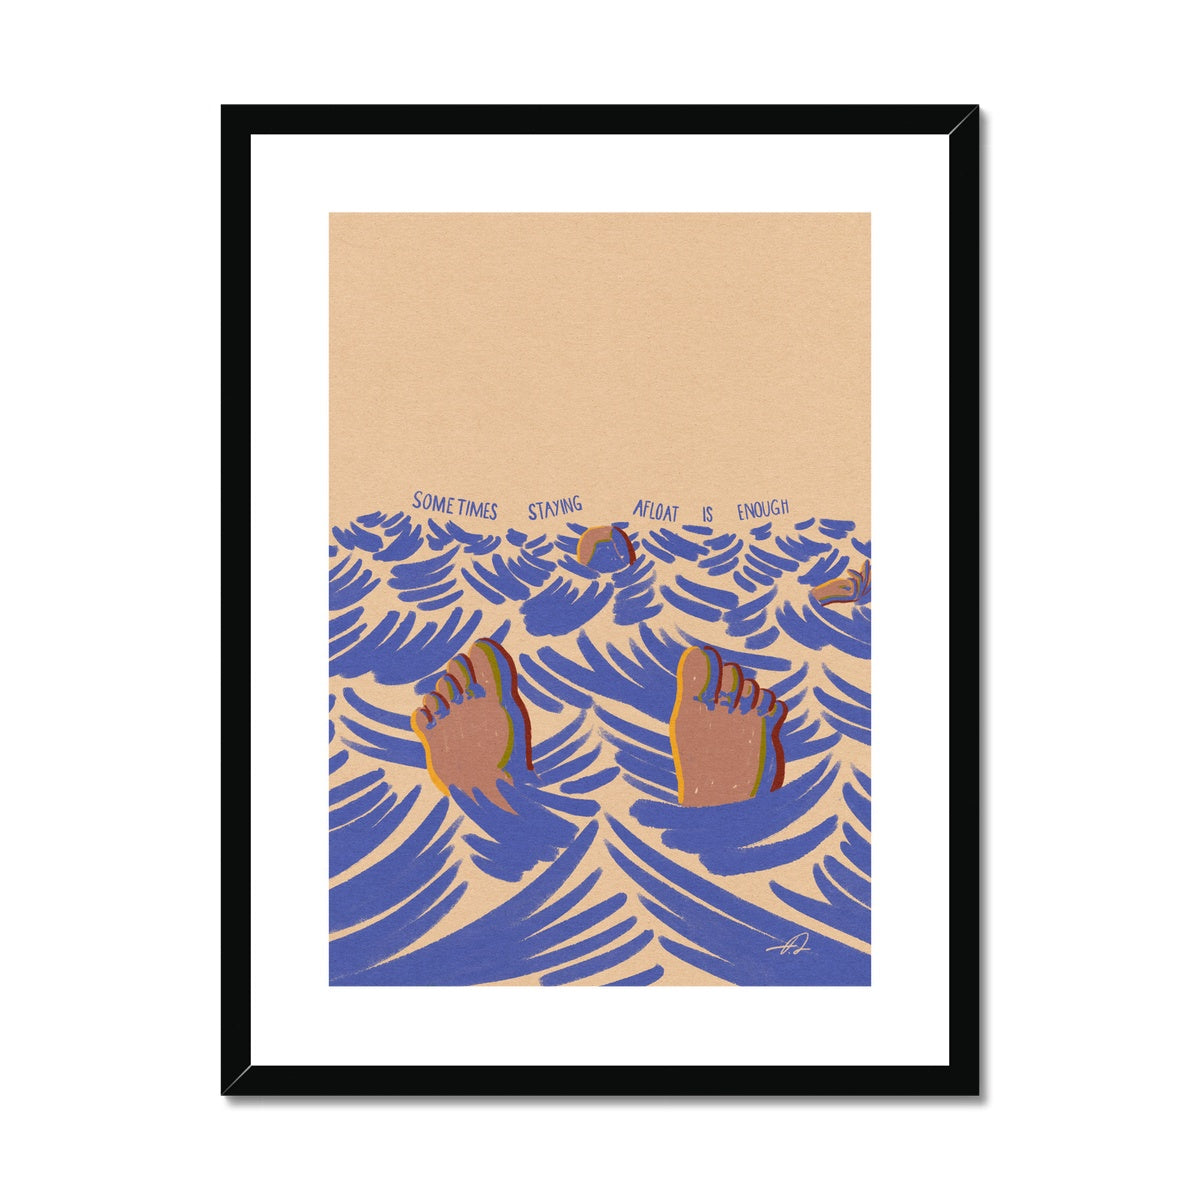 Staying afloat Framed & Mounted Print